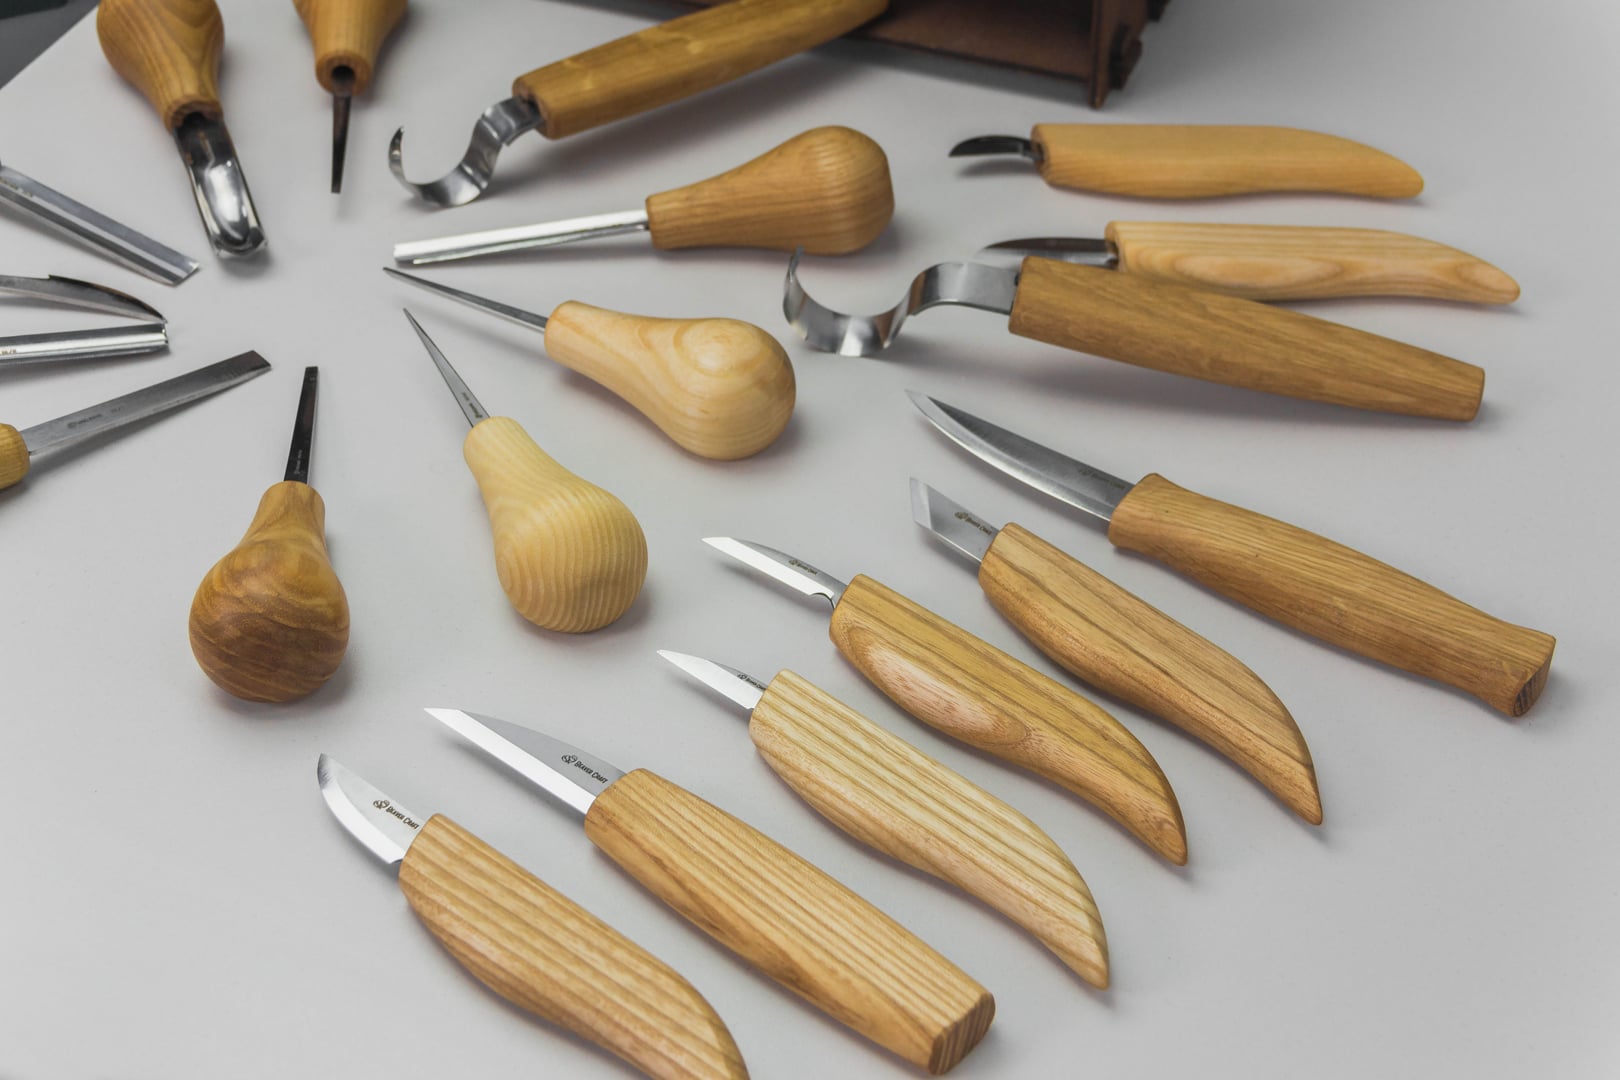  Sculpture House Wood and Linoleum Carving Tools K7 set of 5 :  Arts, Crafts & Sewing